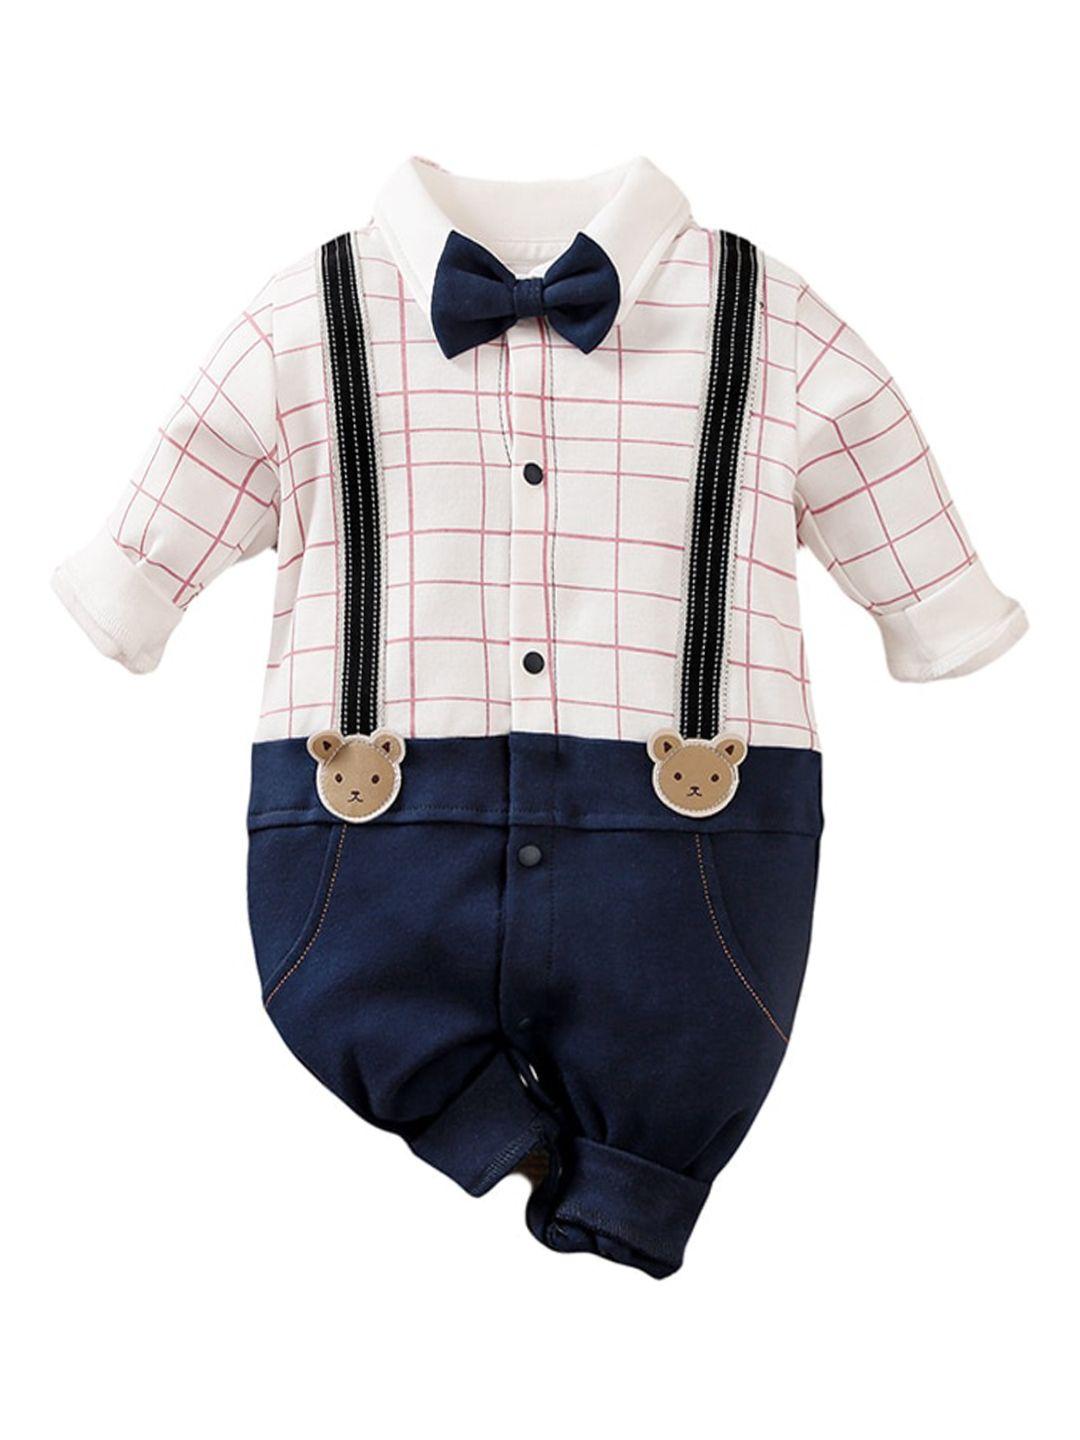 stylecast-infant-boys-checked-pure-cotton-rompers